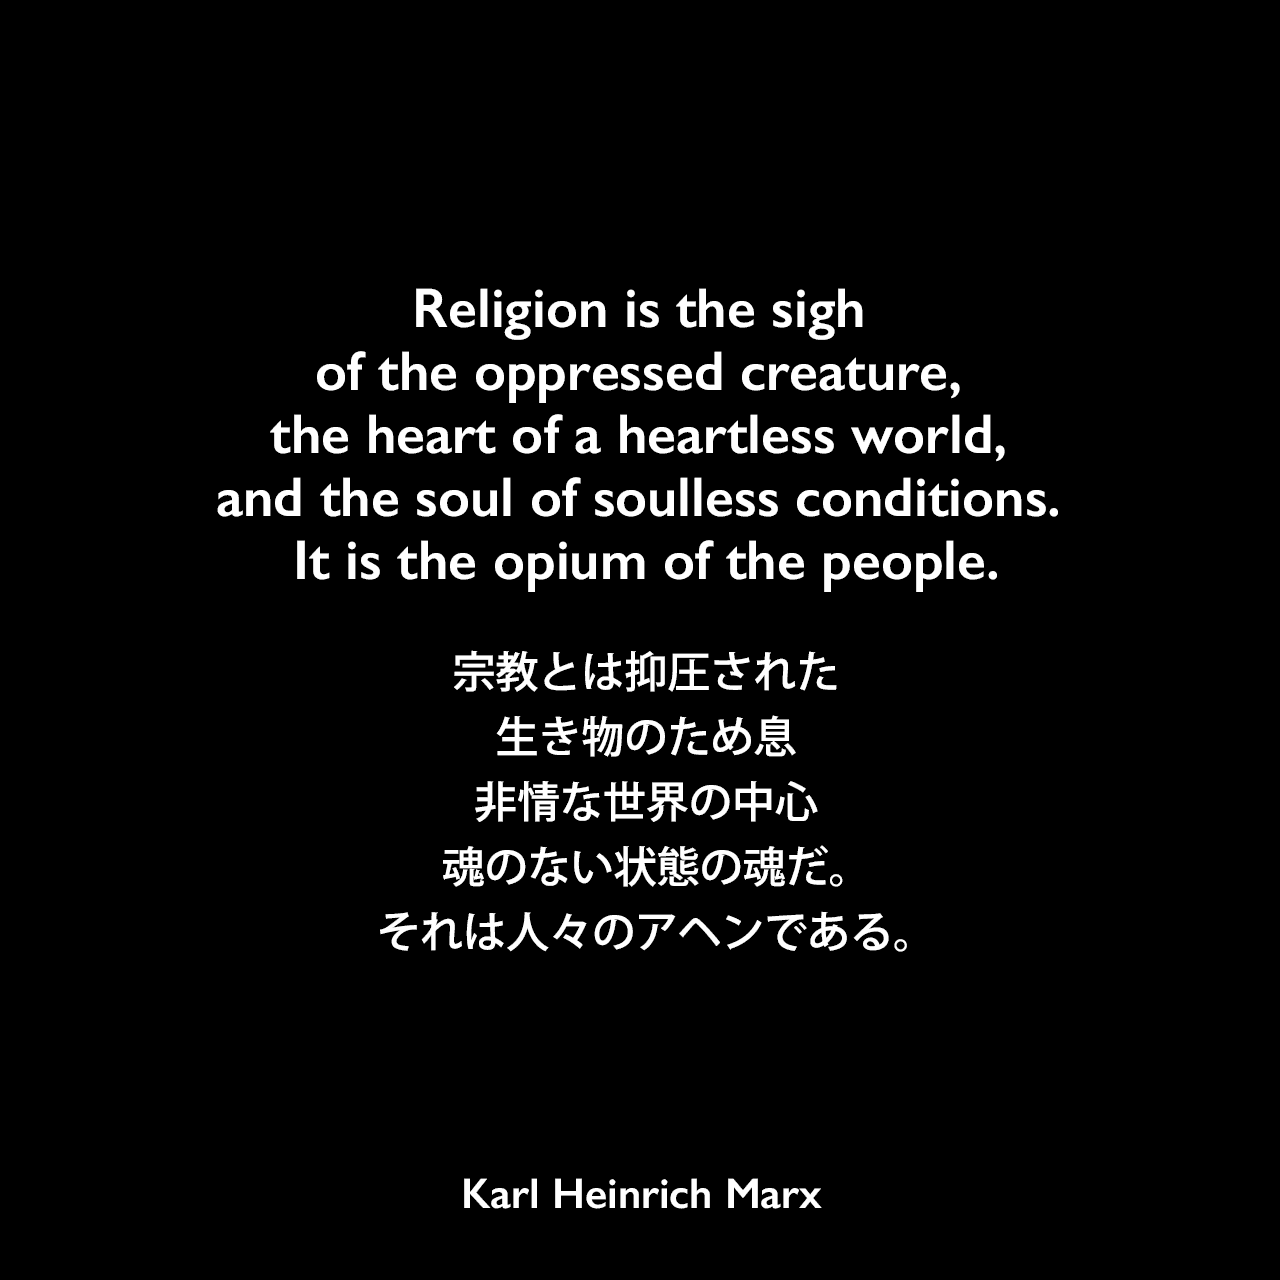 Religion is the sigh of the oppressed creature, the heart of a heartless world, and the soul of soulless conditions. It is the opium of the people.宗教とは抑圧された生き物のため息、非情な世界の中心、魂のない状態の魂だ。それは人々のアヘンである。- カール・マルクスの本「ヘーゲル法哲学批判序説」よりKarl Heinrich Marx